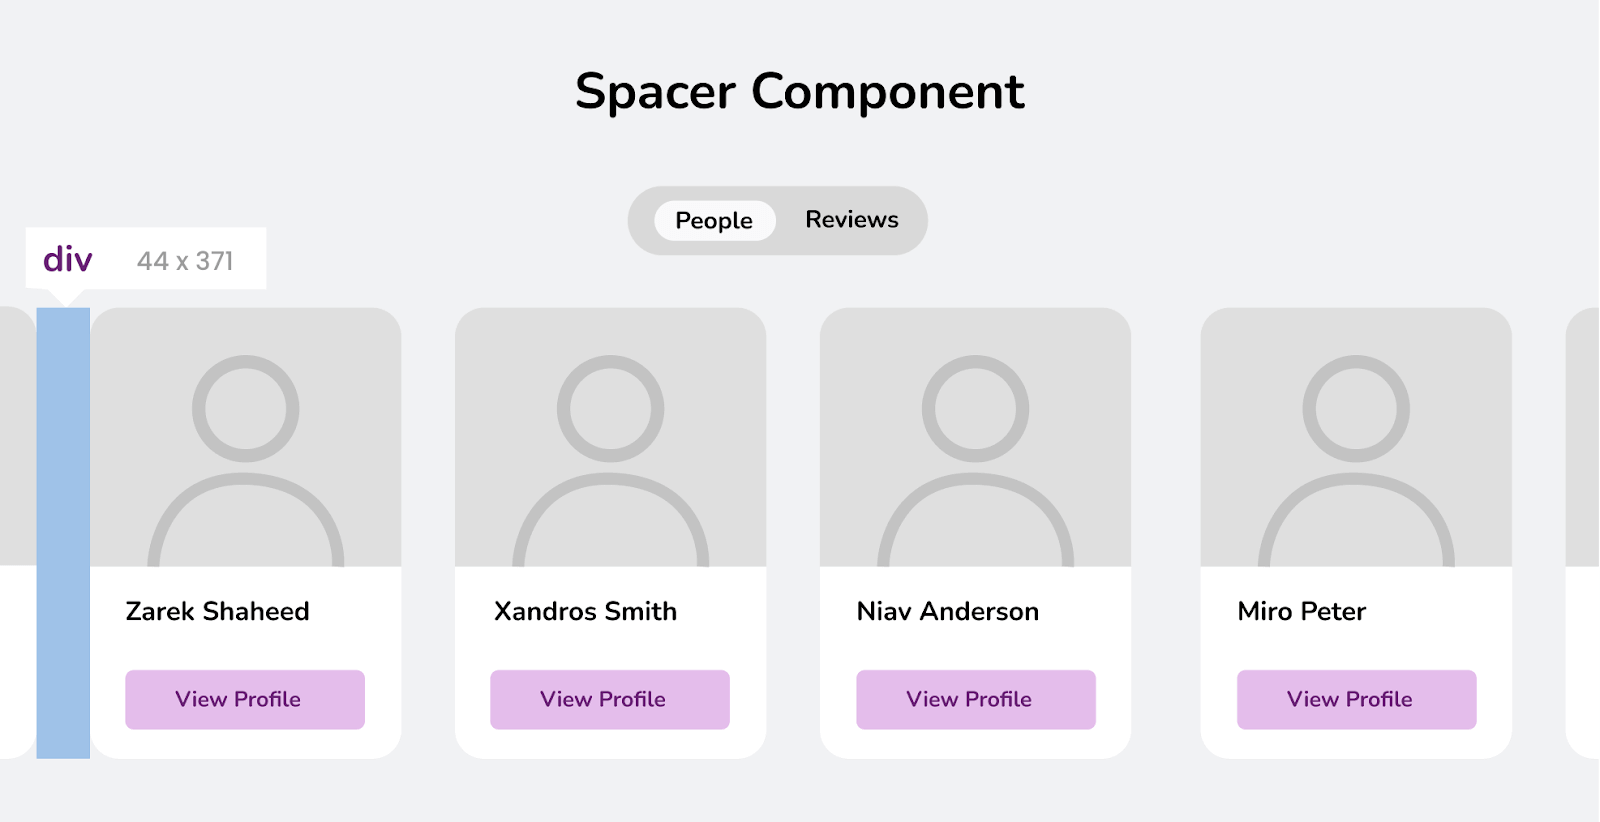 Using Spacer components